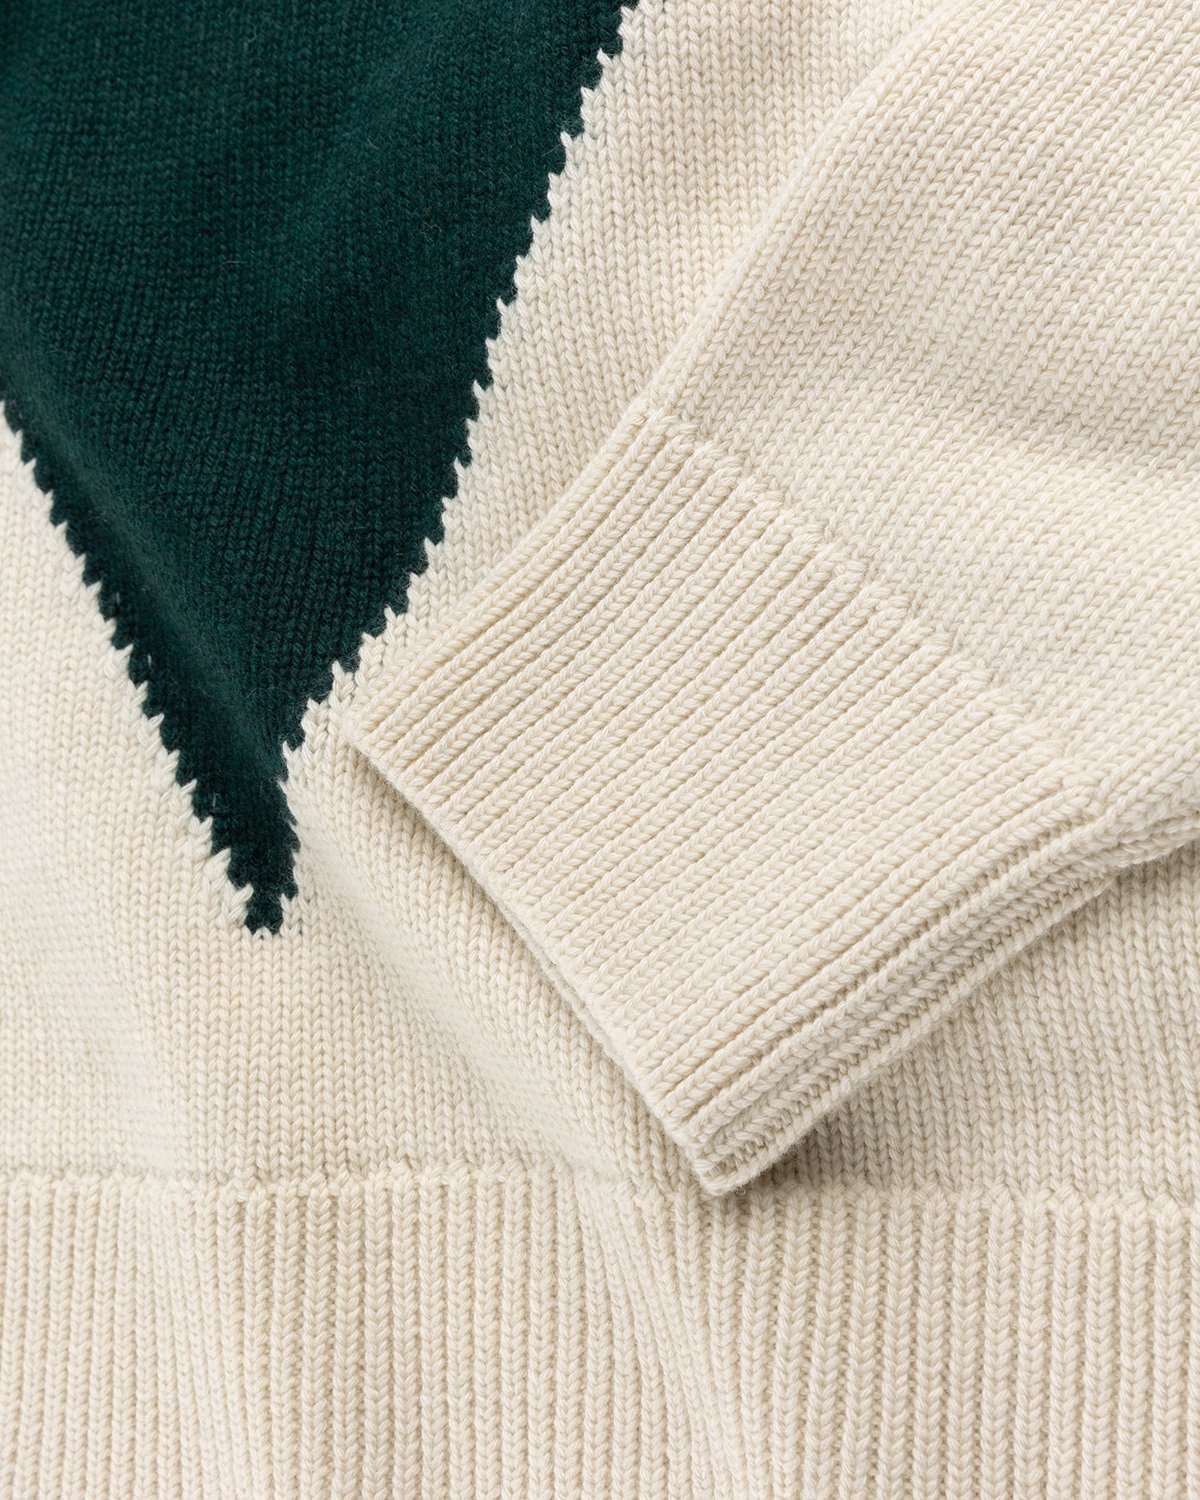 Jil Sander - Cashmere High Neck Knit Sweater Green - Clothing - Green - Image 4